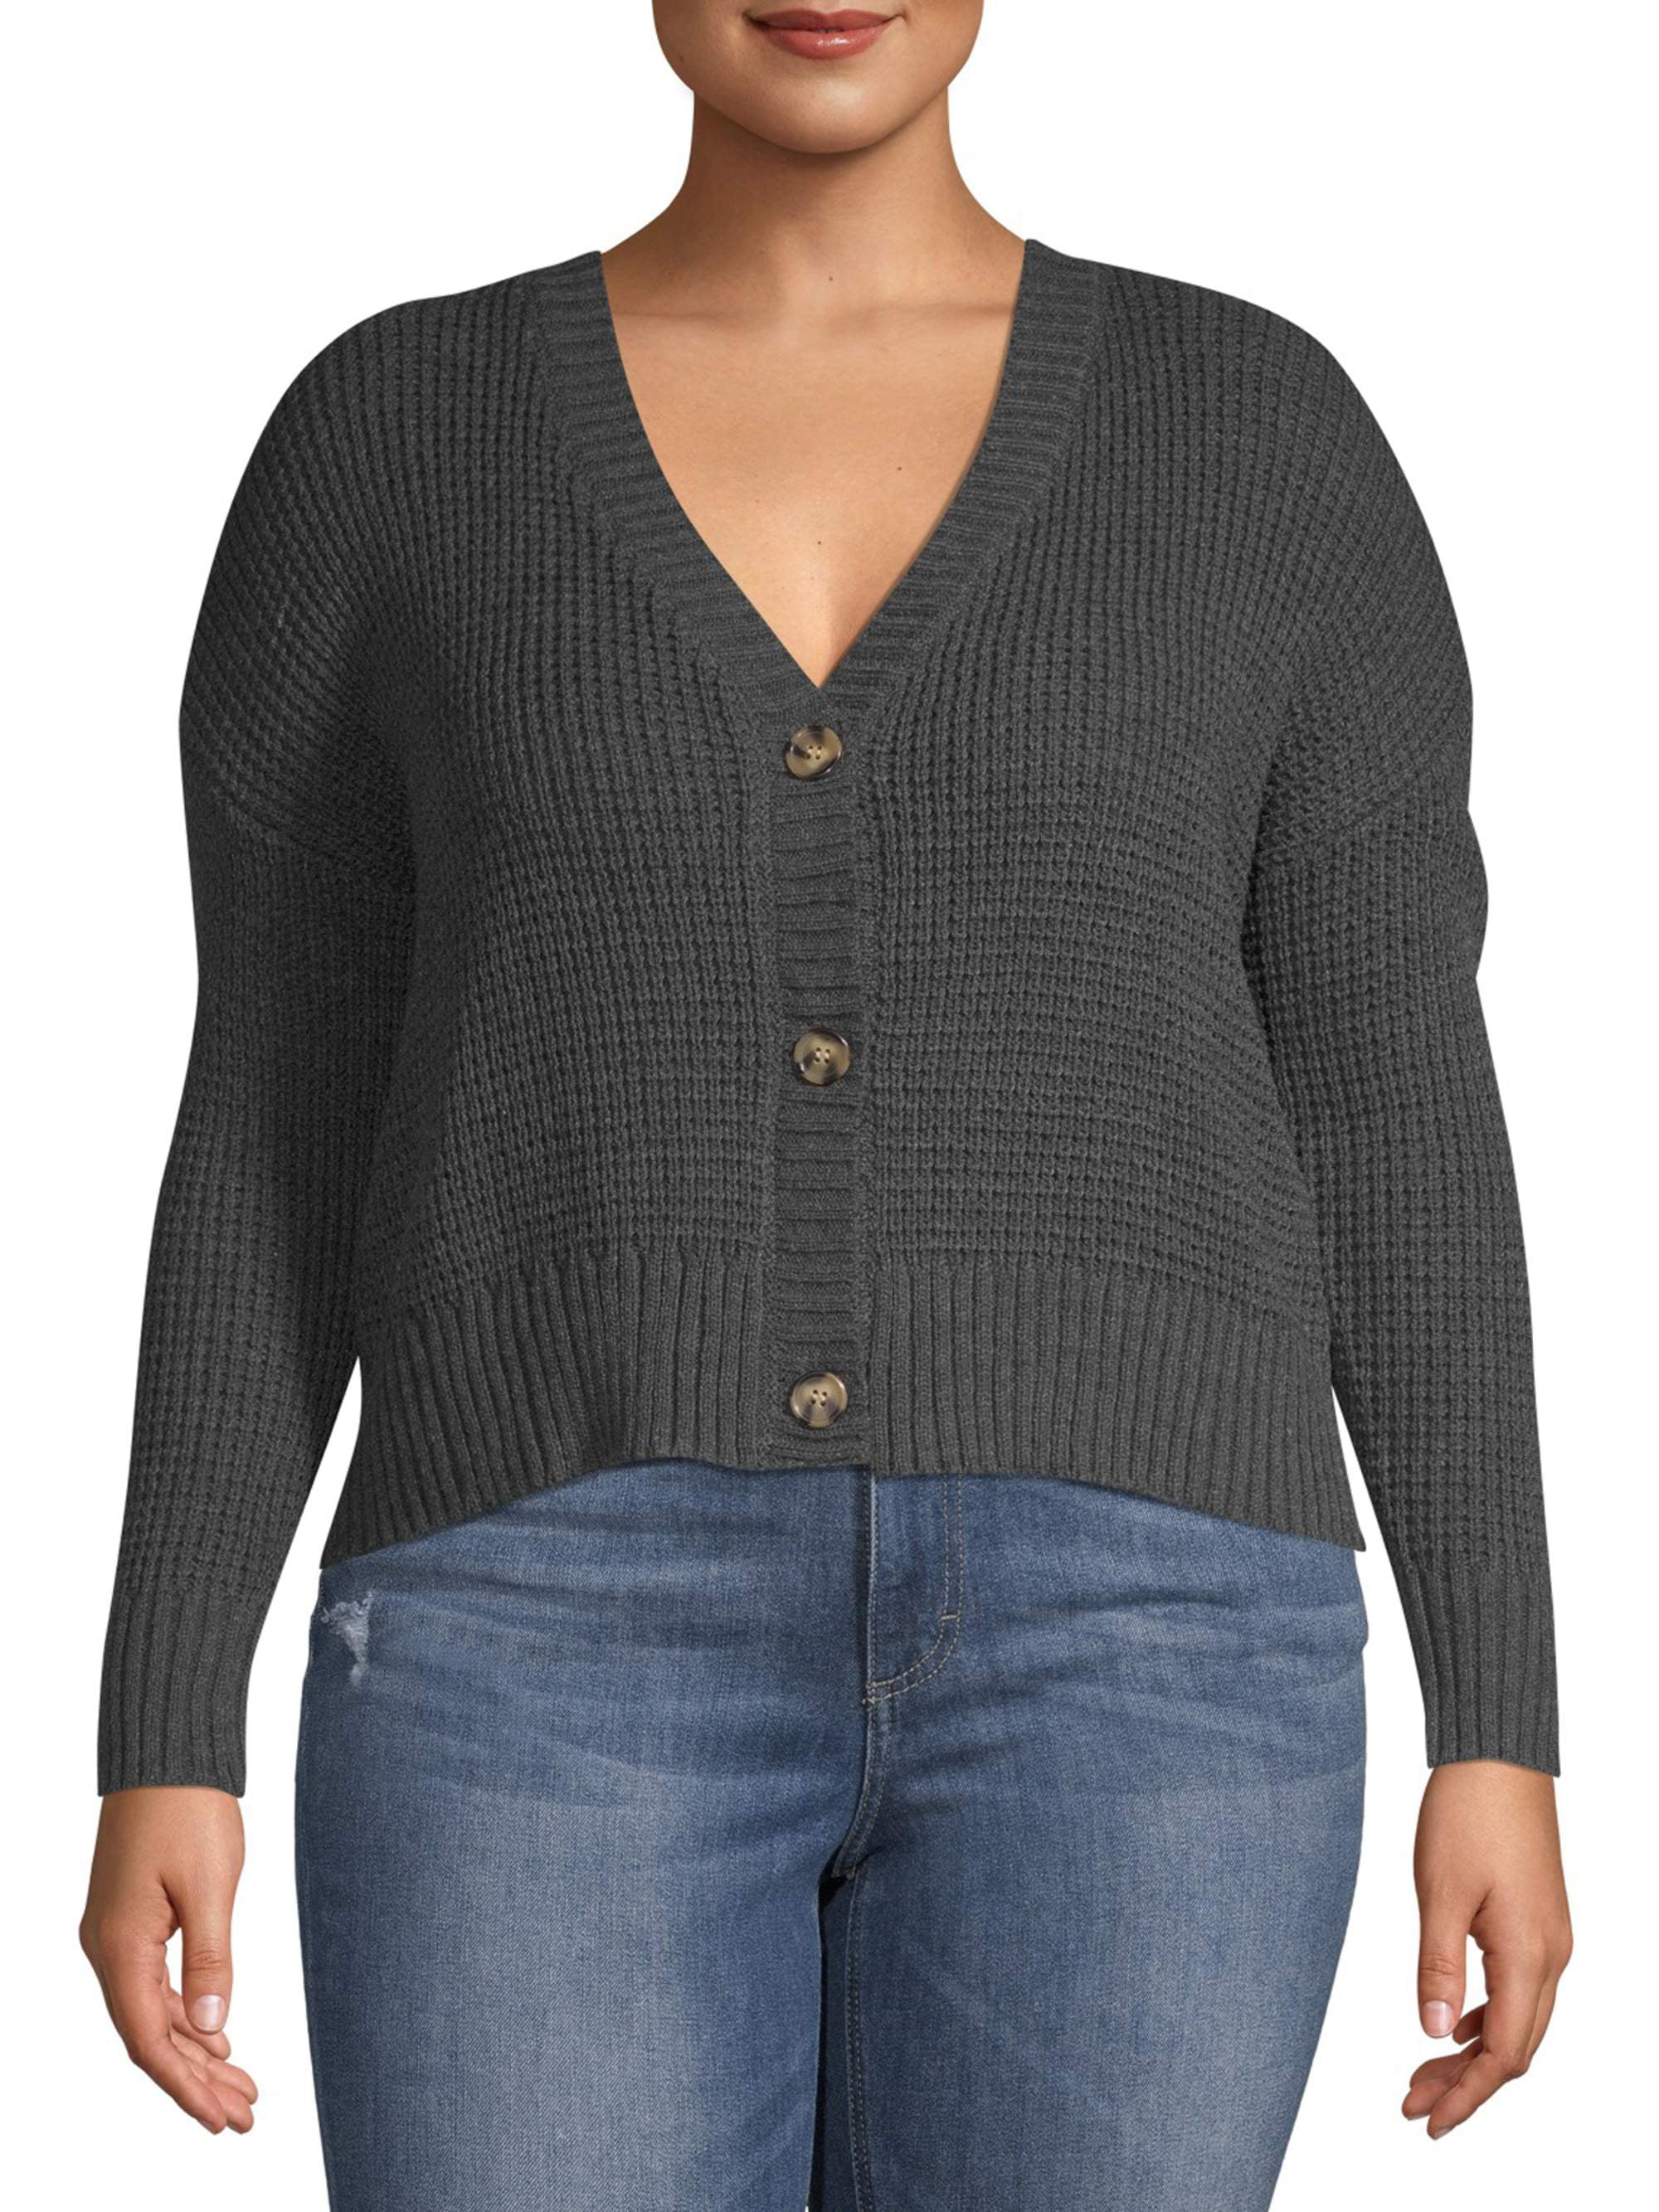 No Comment - No Comment Juniors' Plus Size Cropped Thermal Cardigan ...